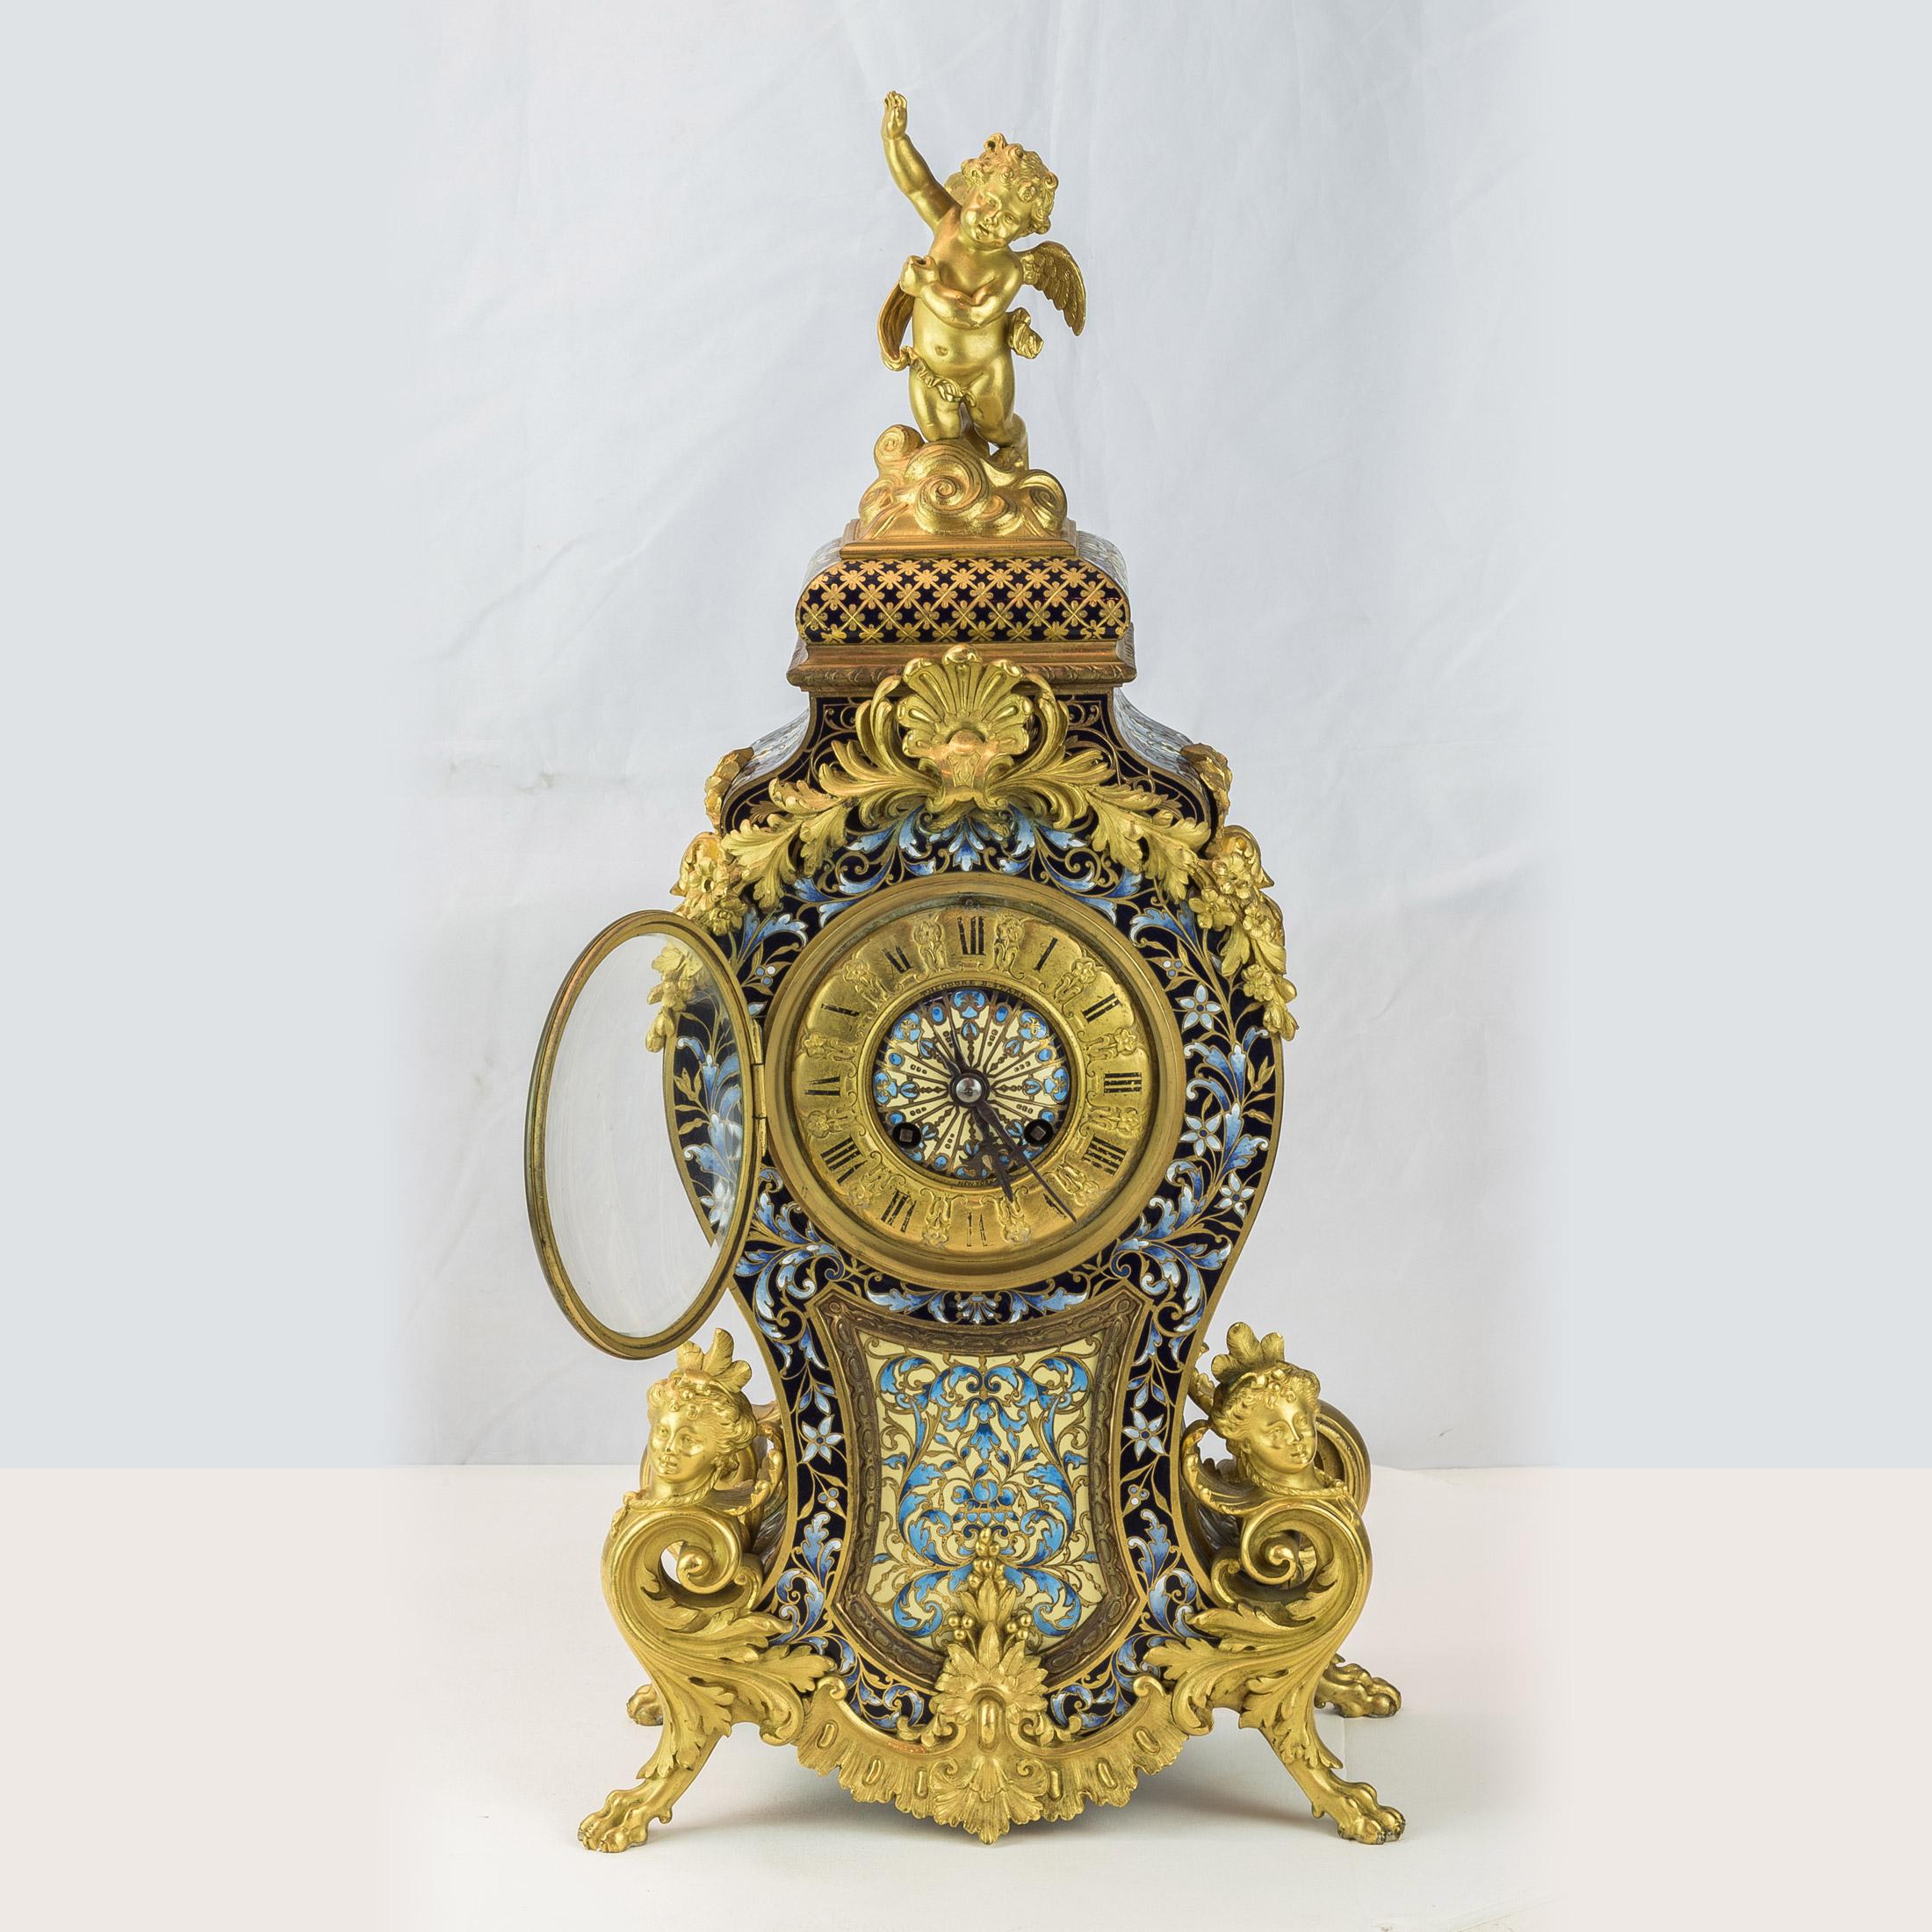 Ormolu and champlevé undulating figural mantel clock surmounted by a gilt cupid in the waves. Ormolu shell and floral mounts above and a plaque below with the base embellished with scrolled gilt god heads and acanthus leaf ormolu all sitting on